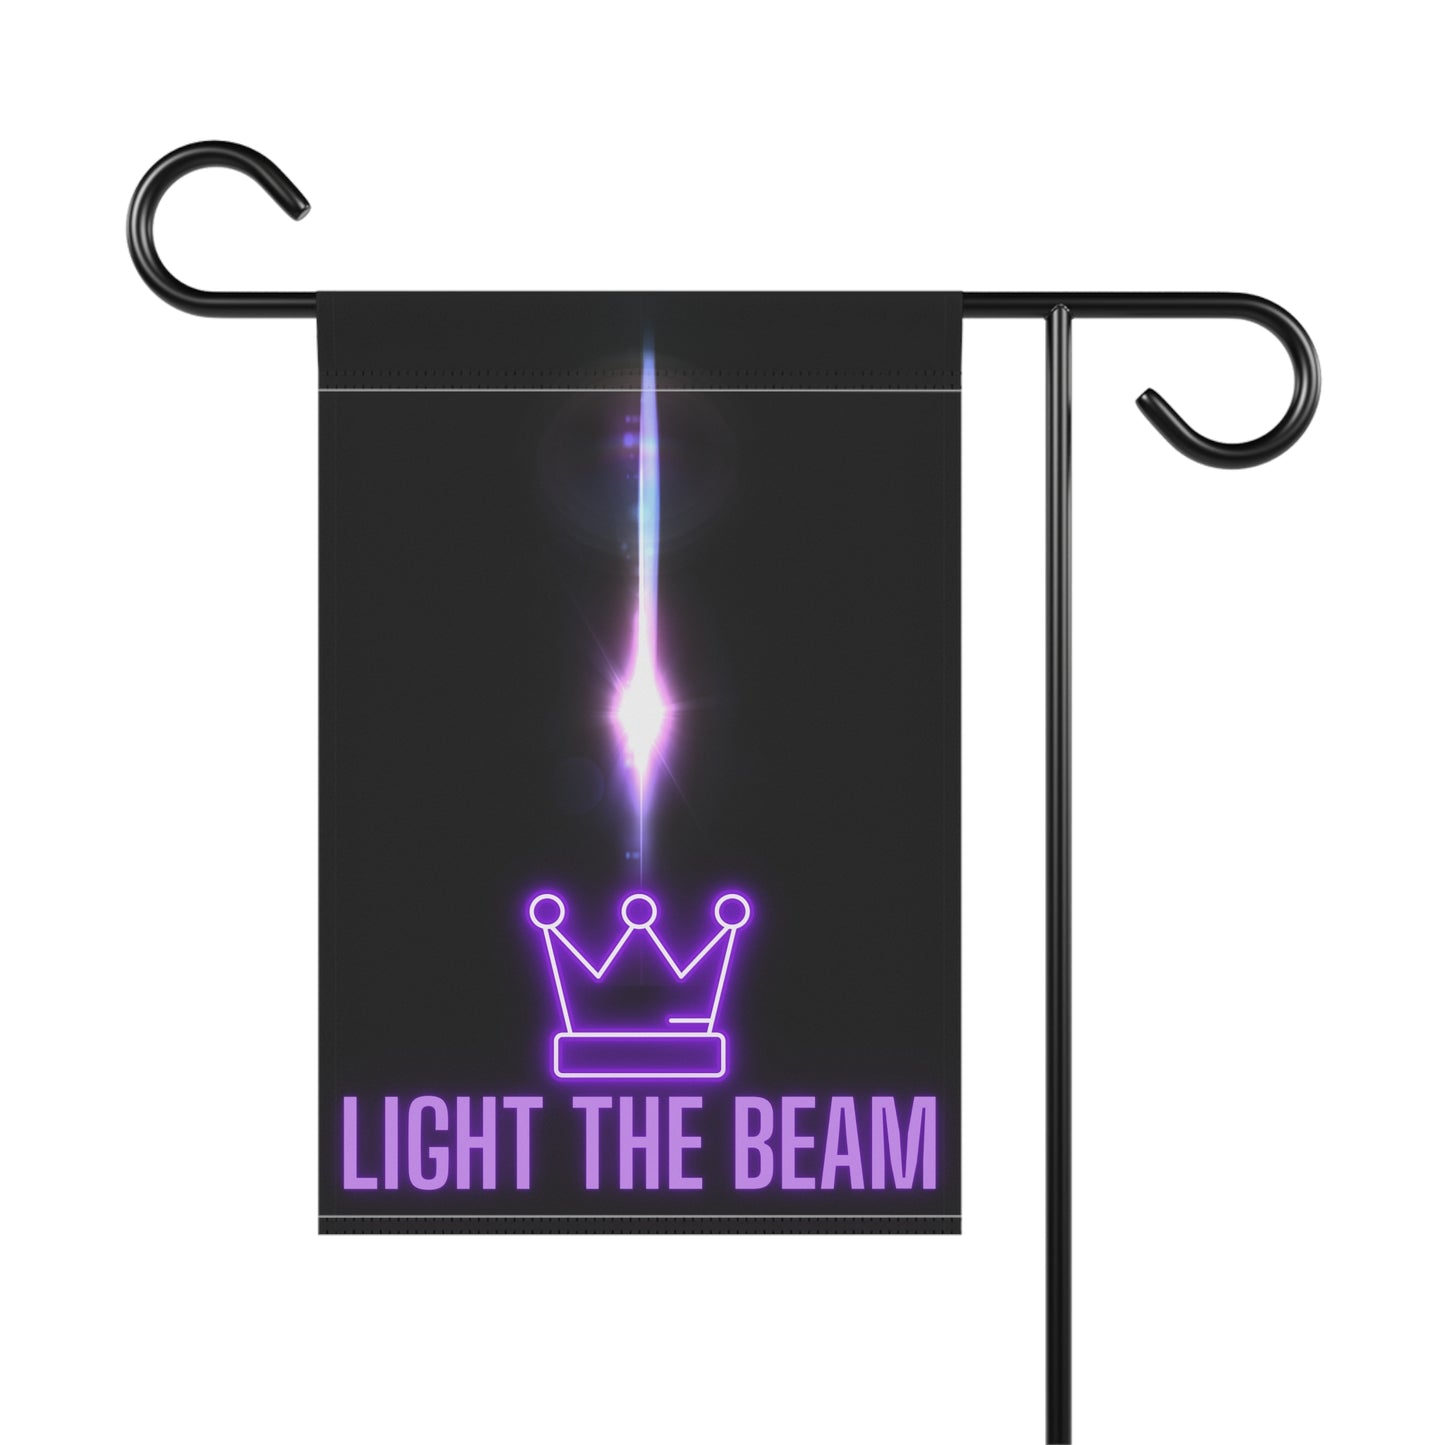 Kings Basketball Light the Beam Banner Yard Flag, Sacramento Basketball Fan House Flag, Kings Fan Gift, Sac Town Beam Team.Light the Beam! Celebrate another W - win - for your Kings Basketball team with a Light the Beam banner yard flag. Perfect to fly on game and the day after another W. Listing is for flag only, pole not included. It's going to be an epic season for our Sacramento Basketball team - show off your Sac-Town pride.